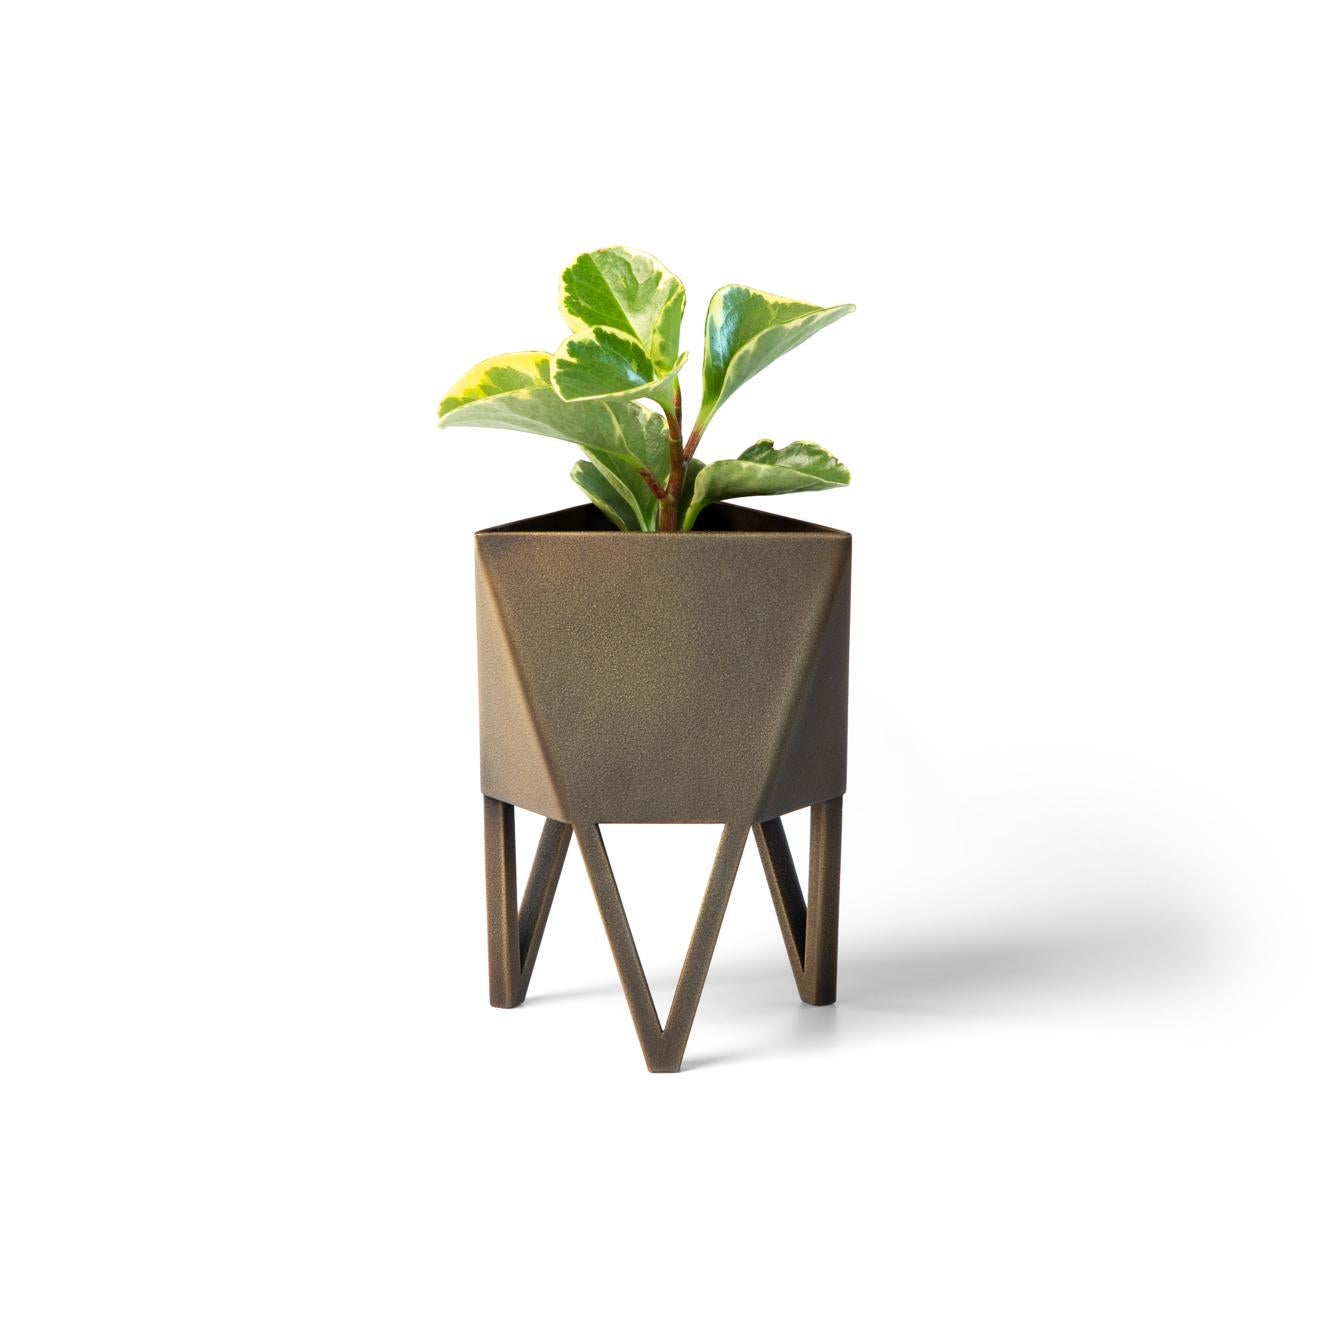 Deca Planter in Black By Force/Collide, Size Small, 2023 For Sale 10